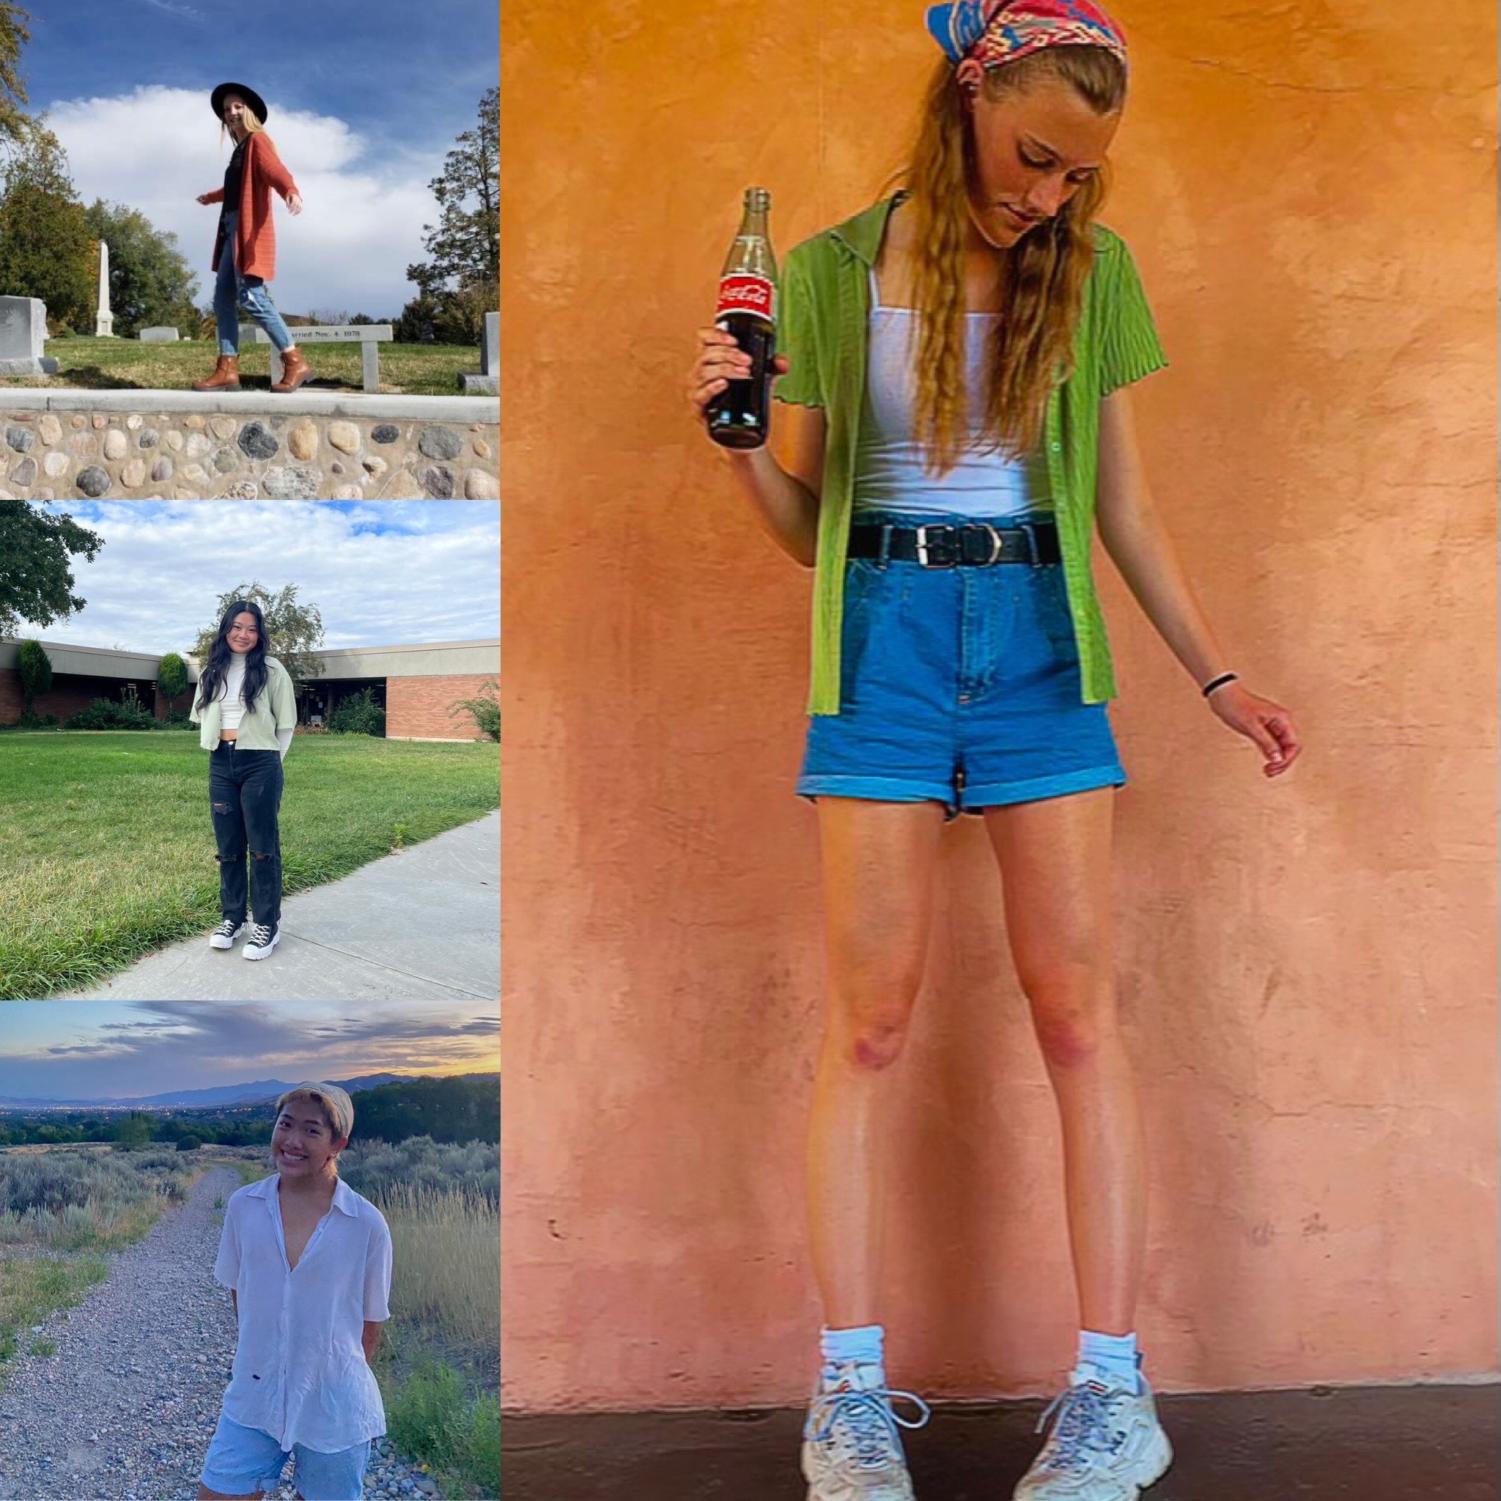 Lily Hood, Tammy Phung, Ratanak Ung, and Shaelyn Openshaw in some of their favorite outfits.